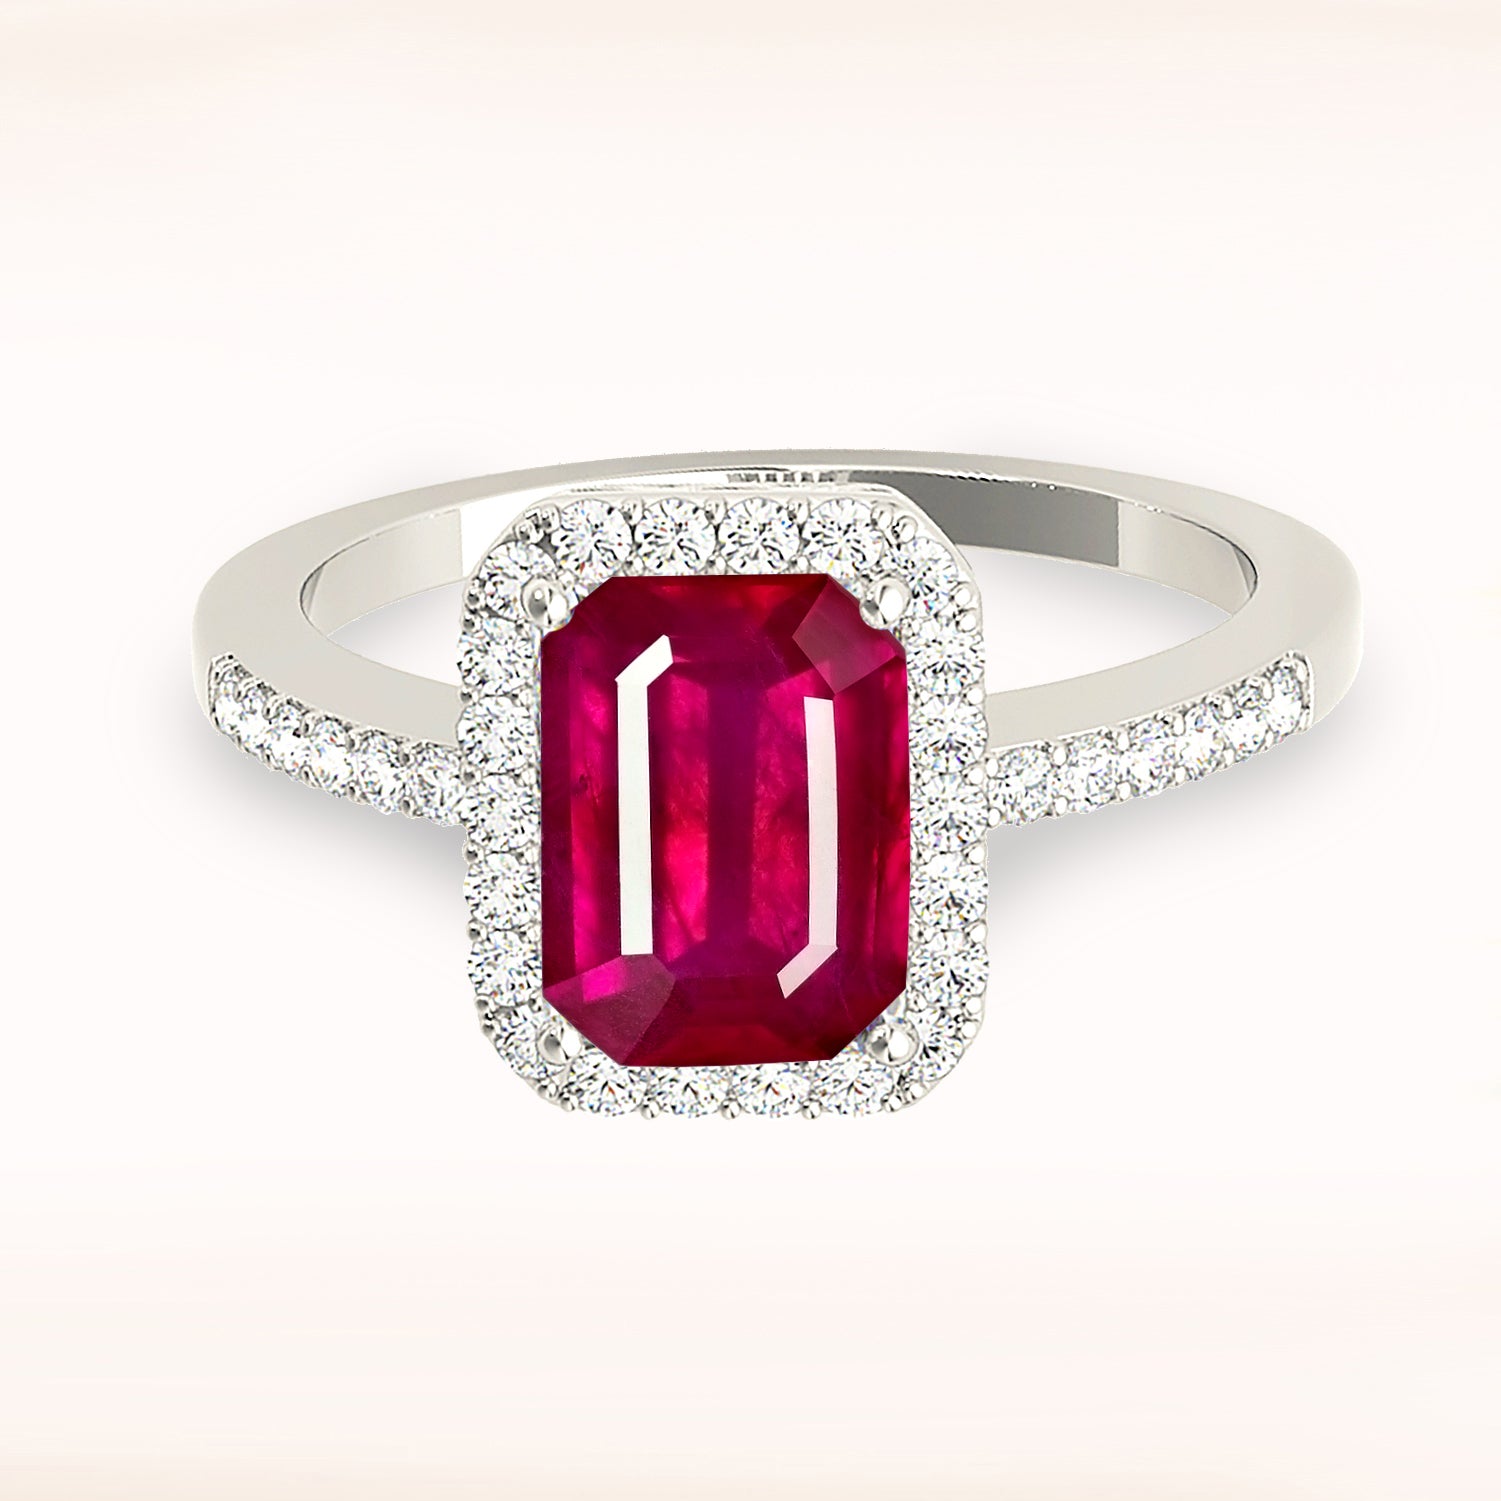 2.30 ct. Genuine Emerald Cut Ruby Ring With 0.25 ctw. Diamond Halo And Delicate Diamond Band-in 14K/18K White, Yellow, Rose Gold and Platinum - Christmas Jewelry Gift -VIRABYANI